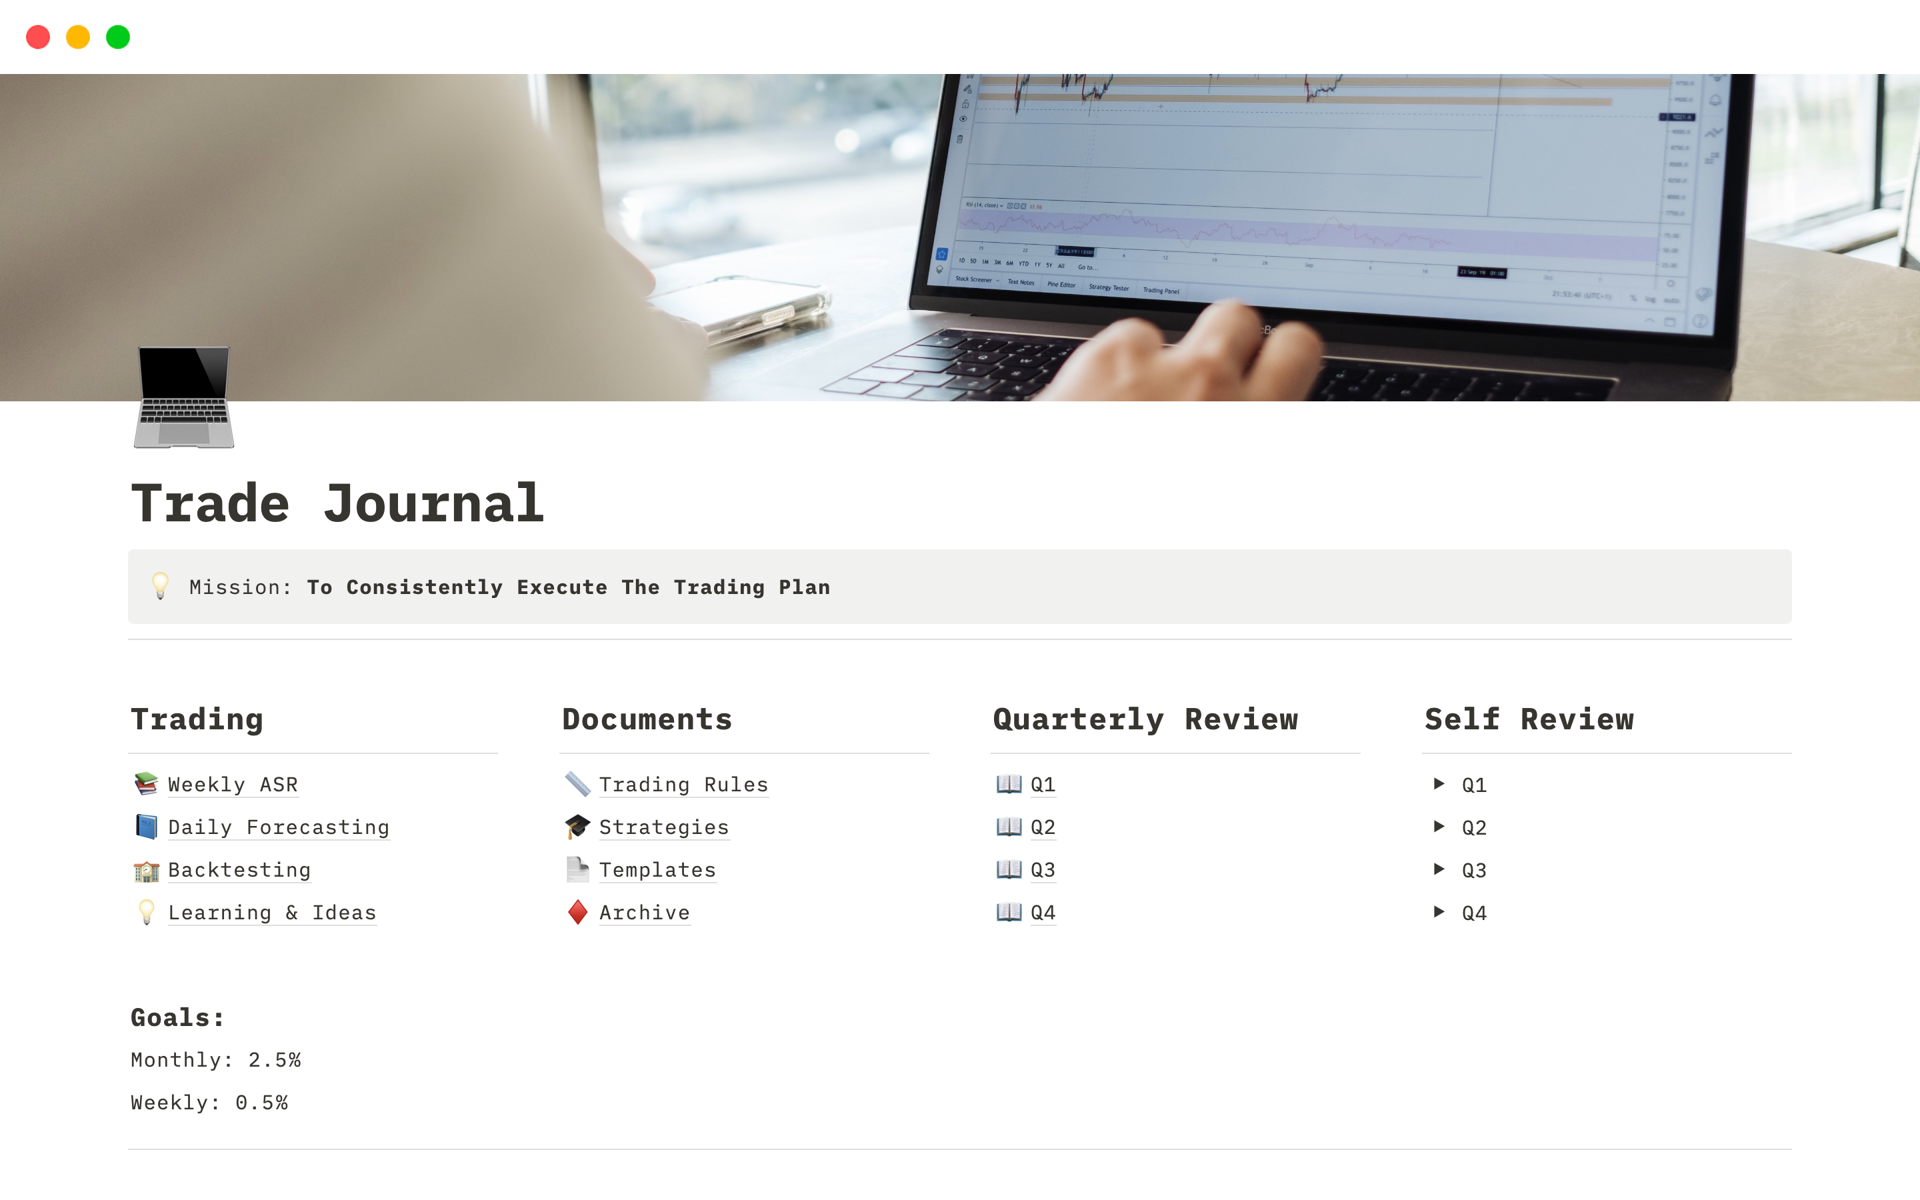 Track your trades and progress with this journal!